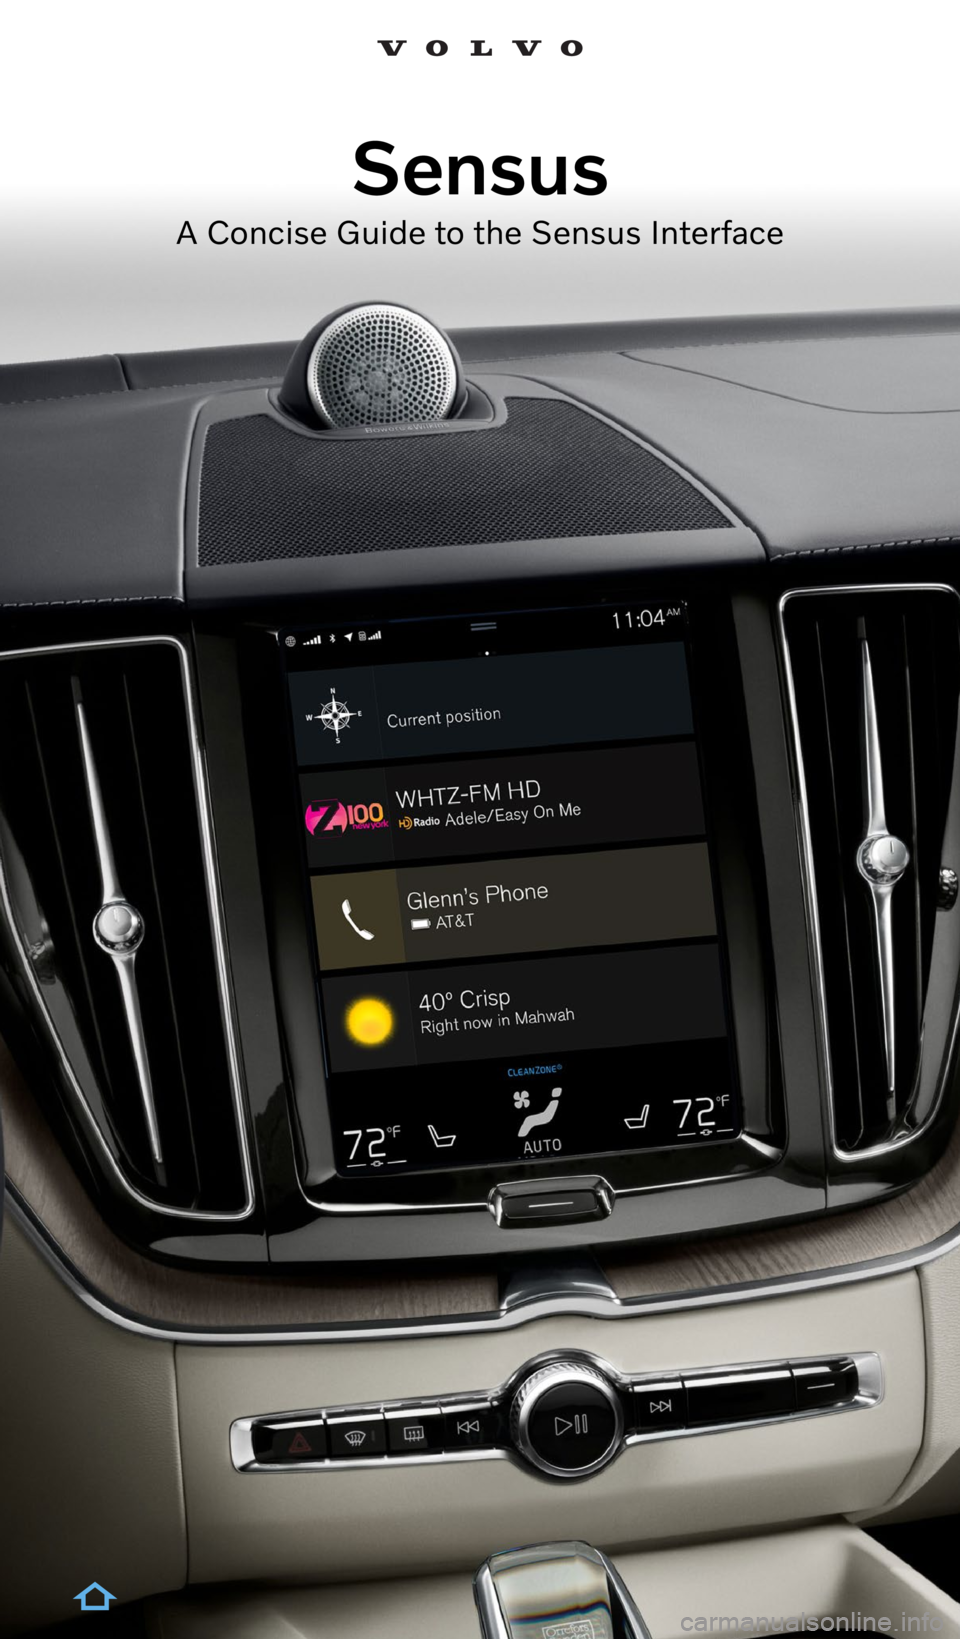 VOLVO S60 2022  Sensus Digital Guide Sensus
A Concise Guide to the Sensus Interface  